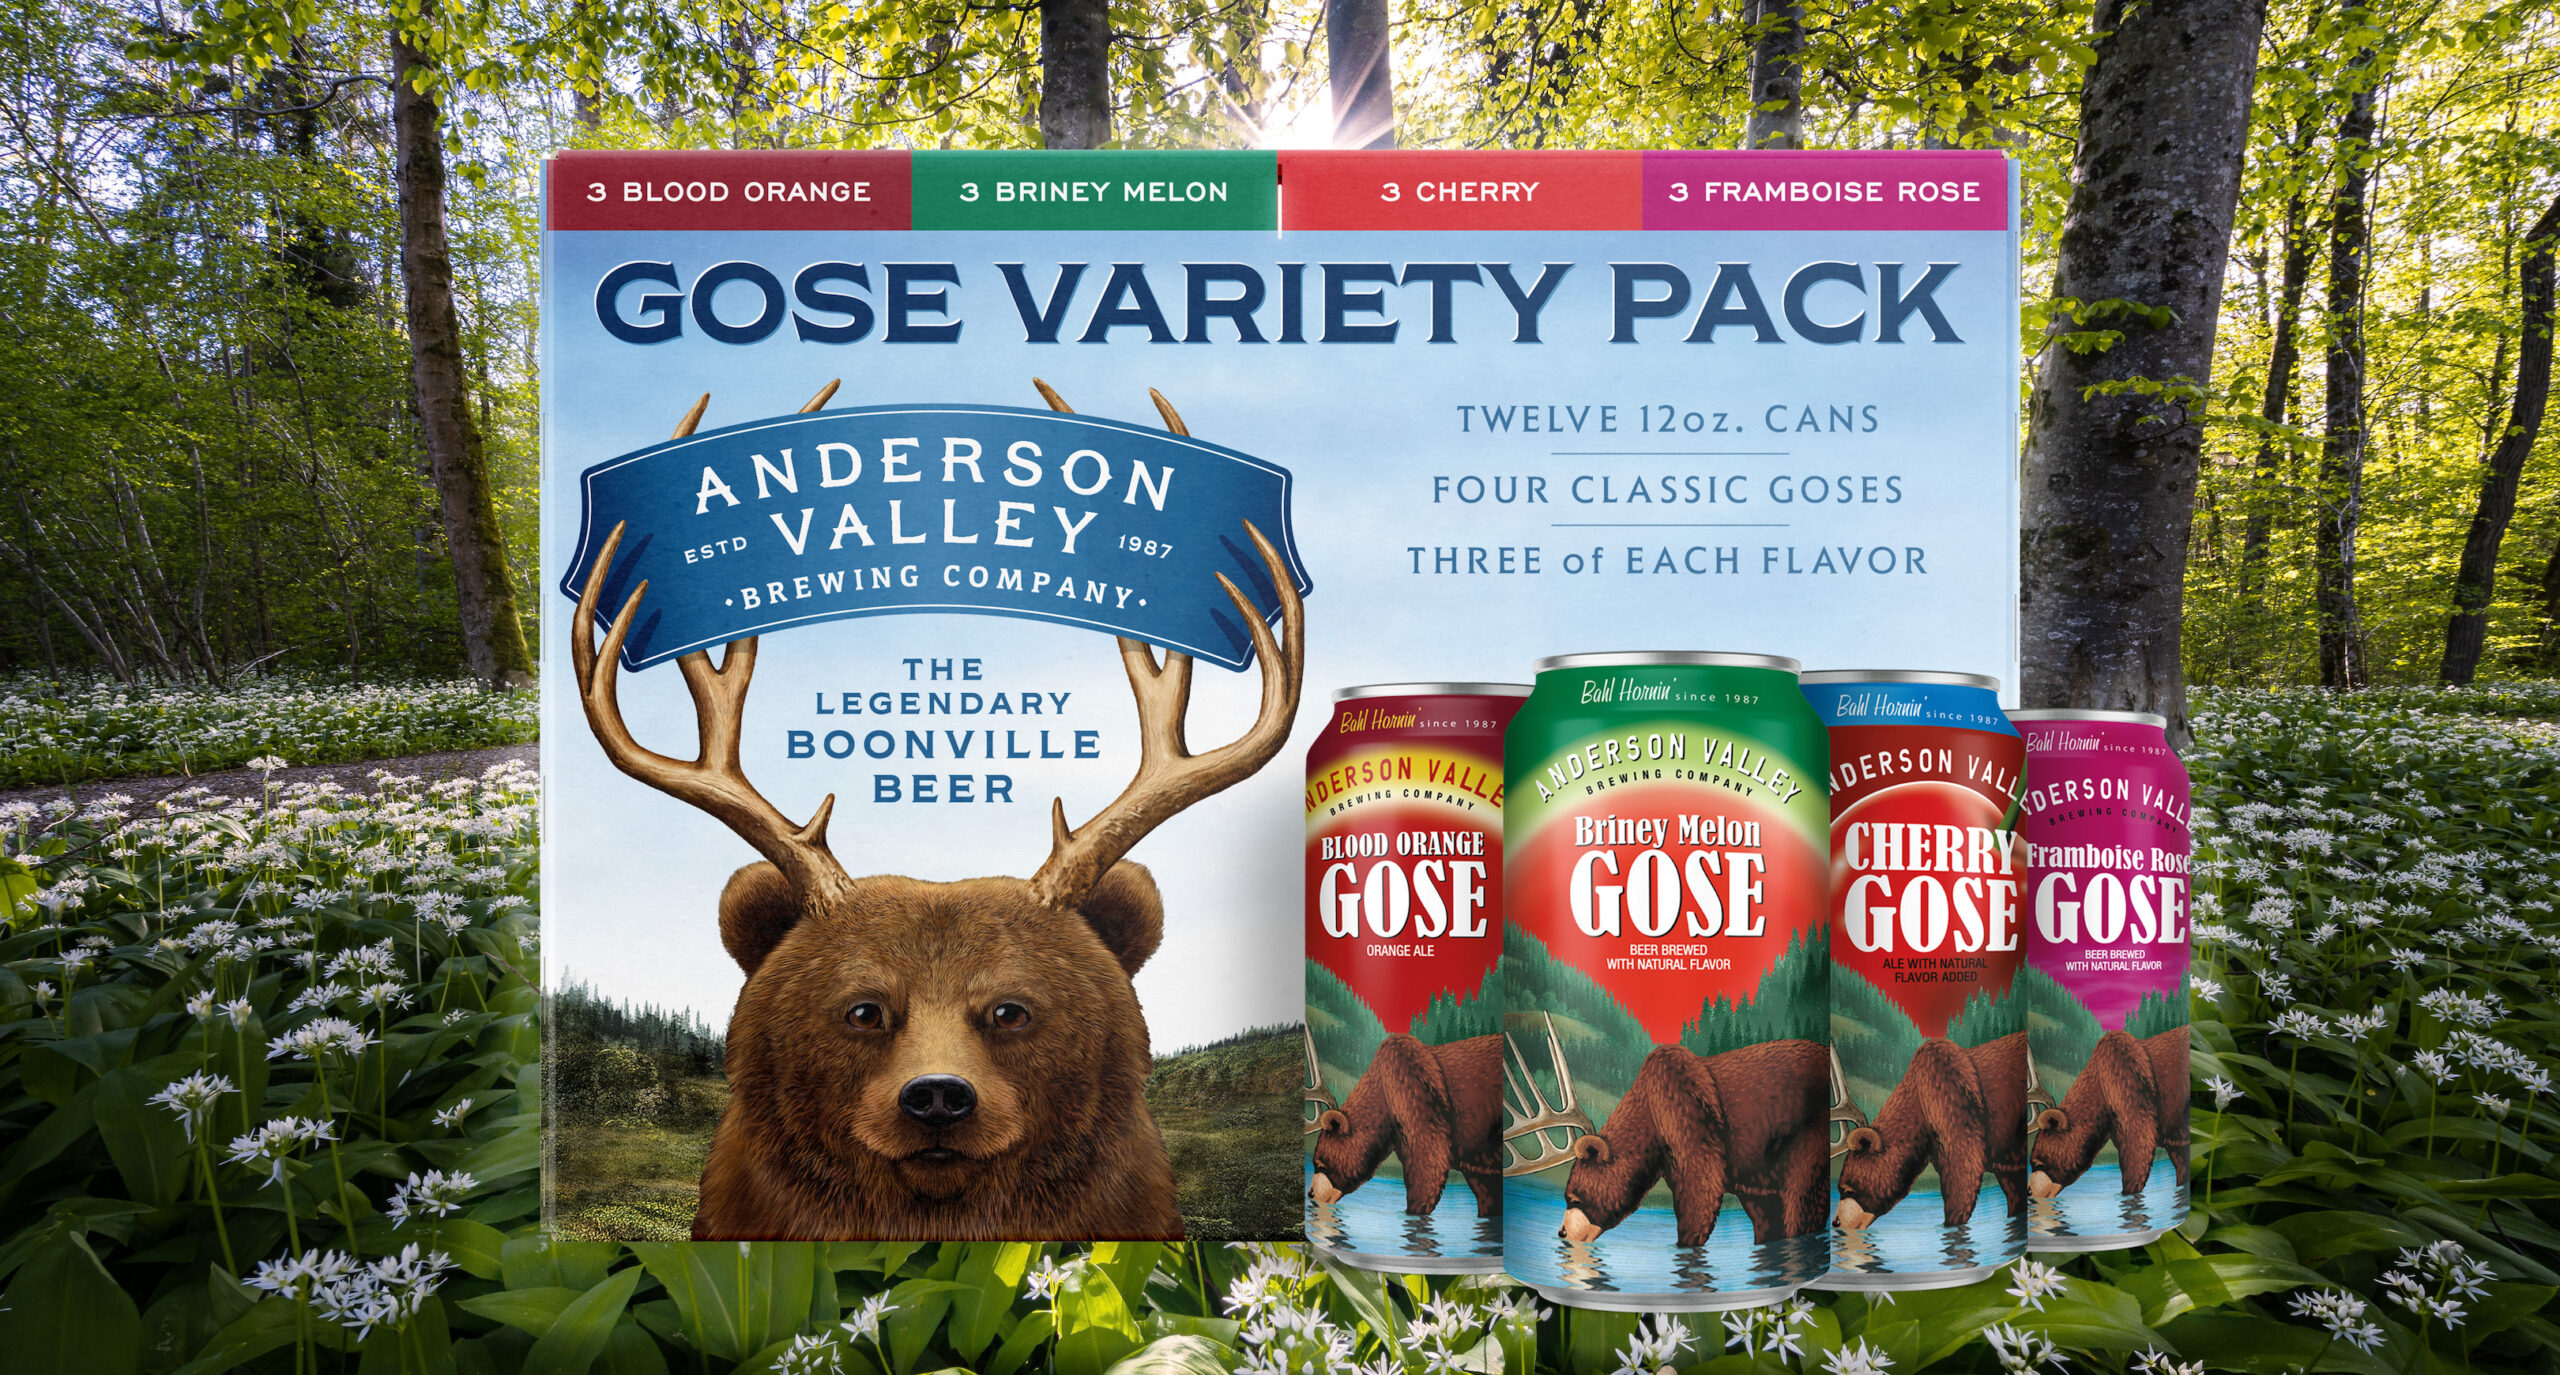 A Variation for Spring: The Gose Variety Pack